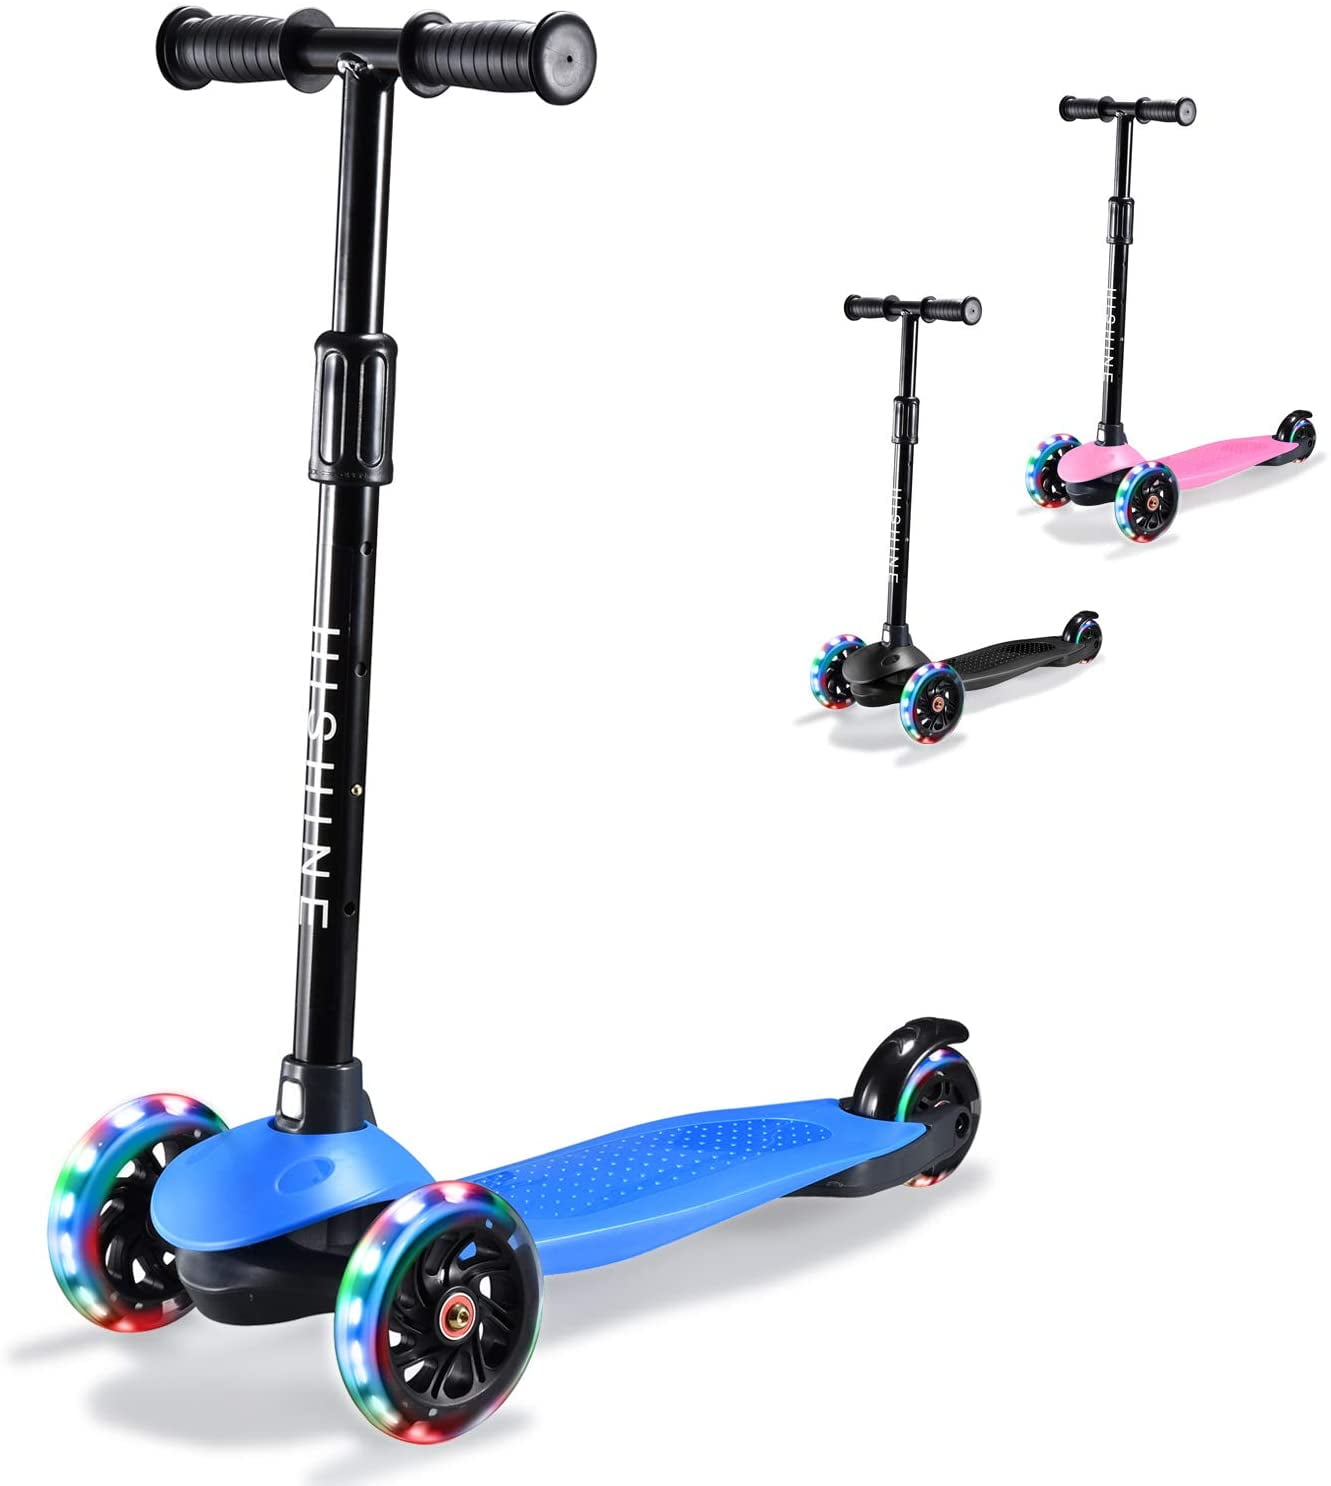 Hishine Kick Scooter for Kids with 3 Light up Wheels and Adjustable Height for 2-7 Years Old Ages Girls Boys Toddlers & Children,Lean to Steer 3 Wheel Scooters 